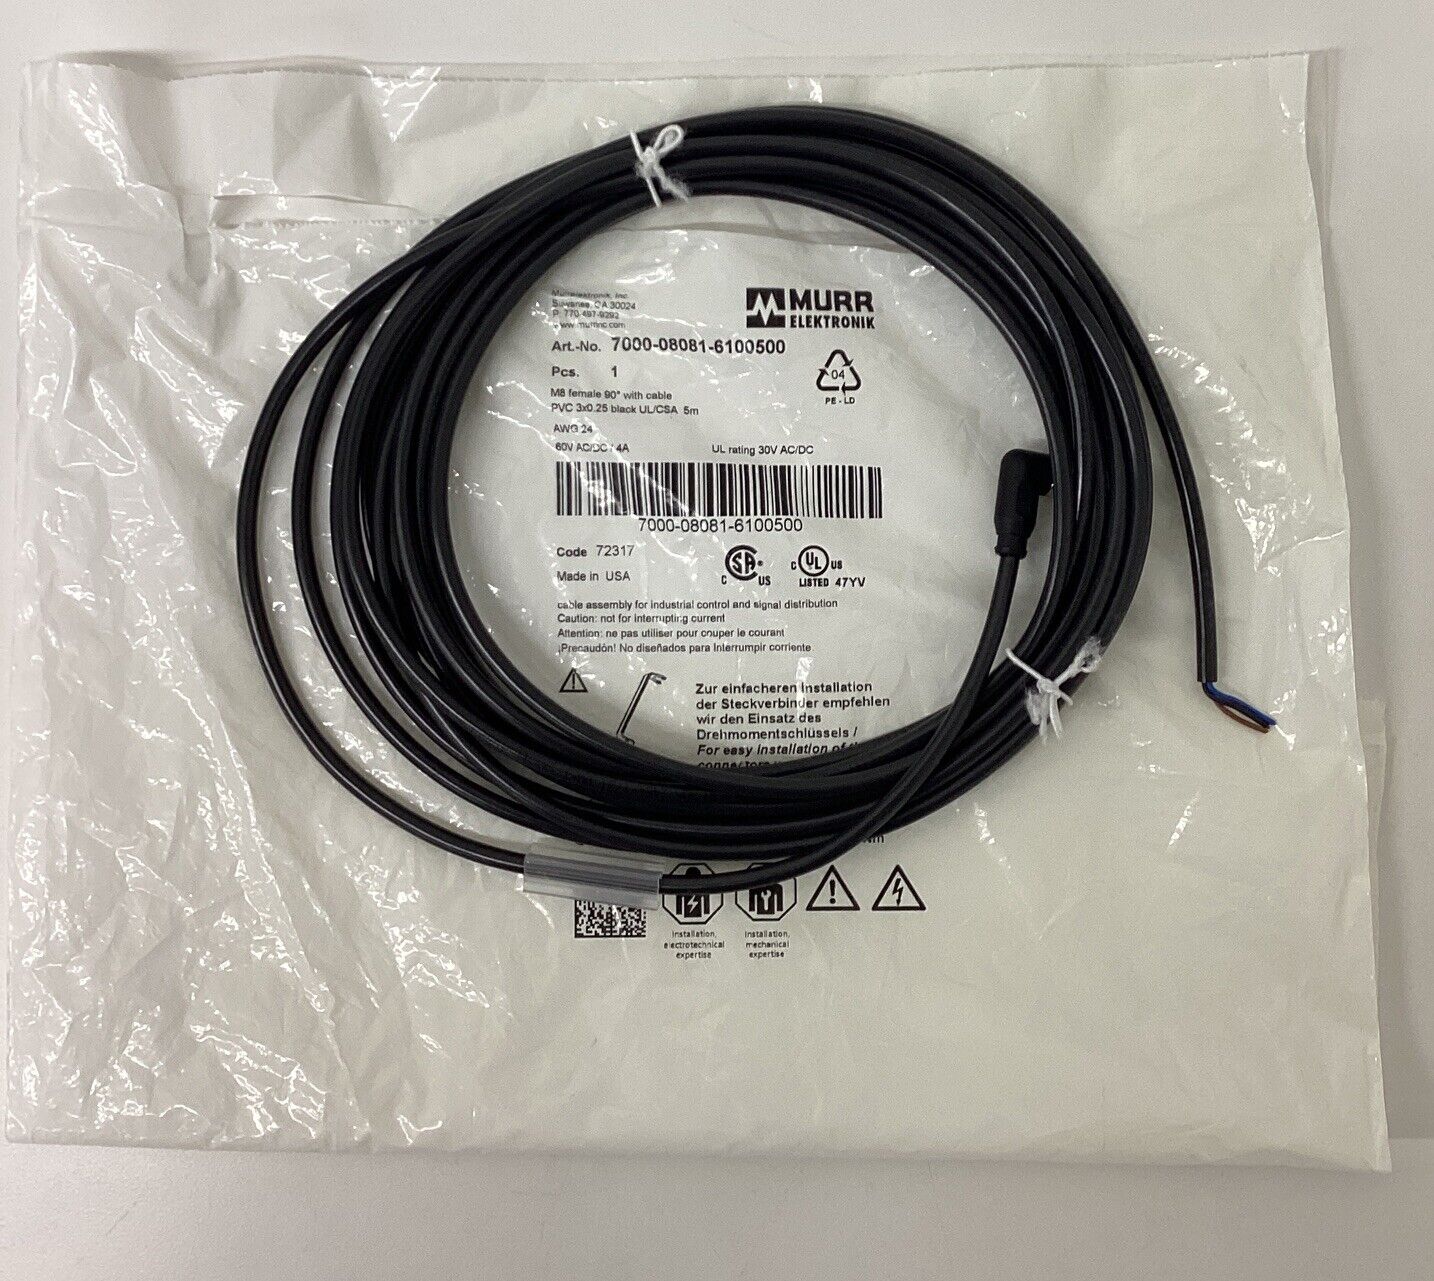 Murr 7000-08081-6100500 M8 Female 90 Degree 3-Wire, 5-Meters Cable (CBL138)